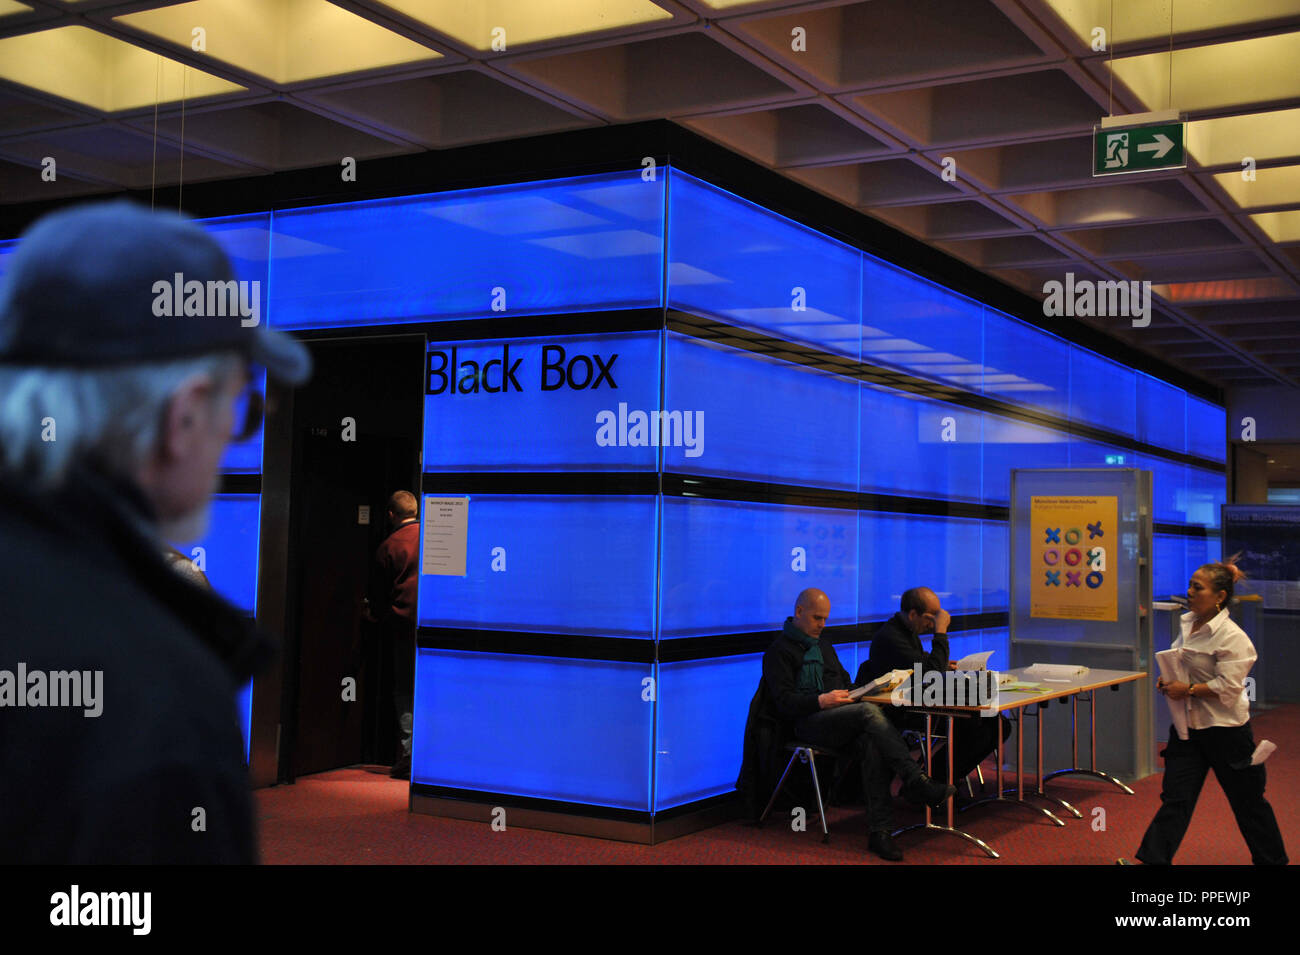 The Black Box High Resolution Stock Photography and Images - Alamy